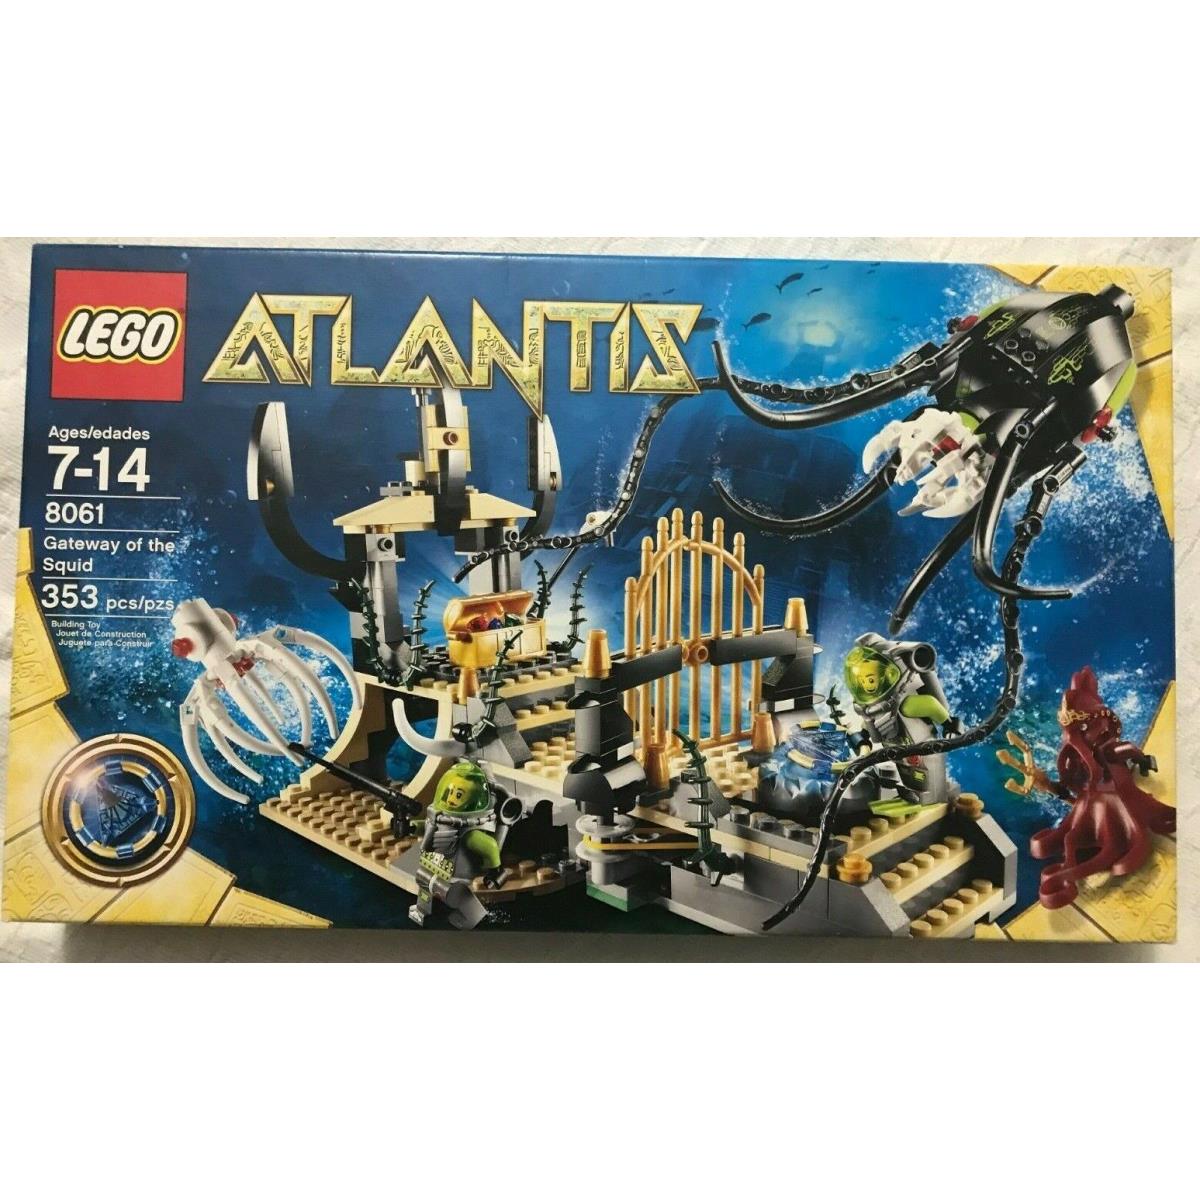 Lego Atlantis 8061 Gateway of The Squid 353 Pieces Hard to Find Building Set